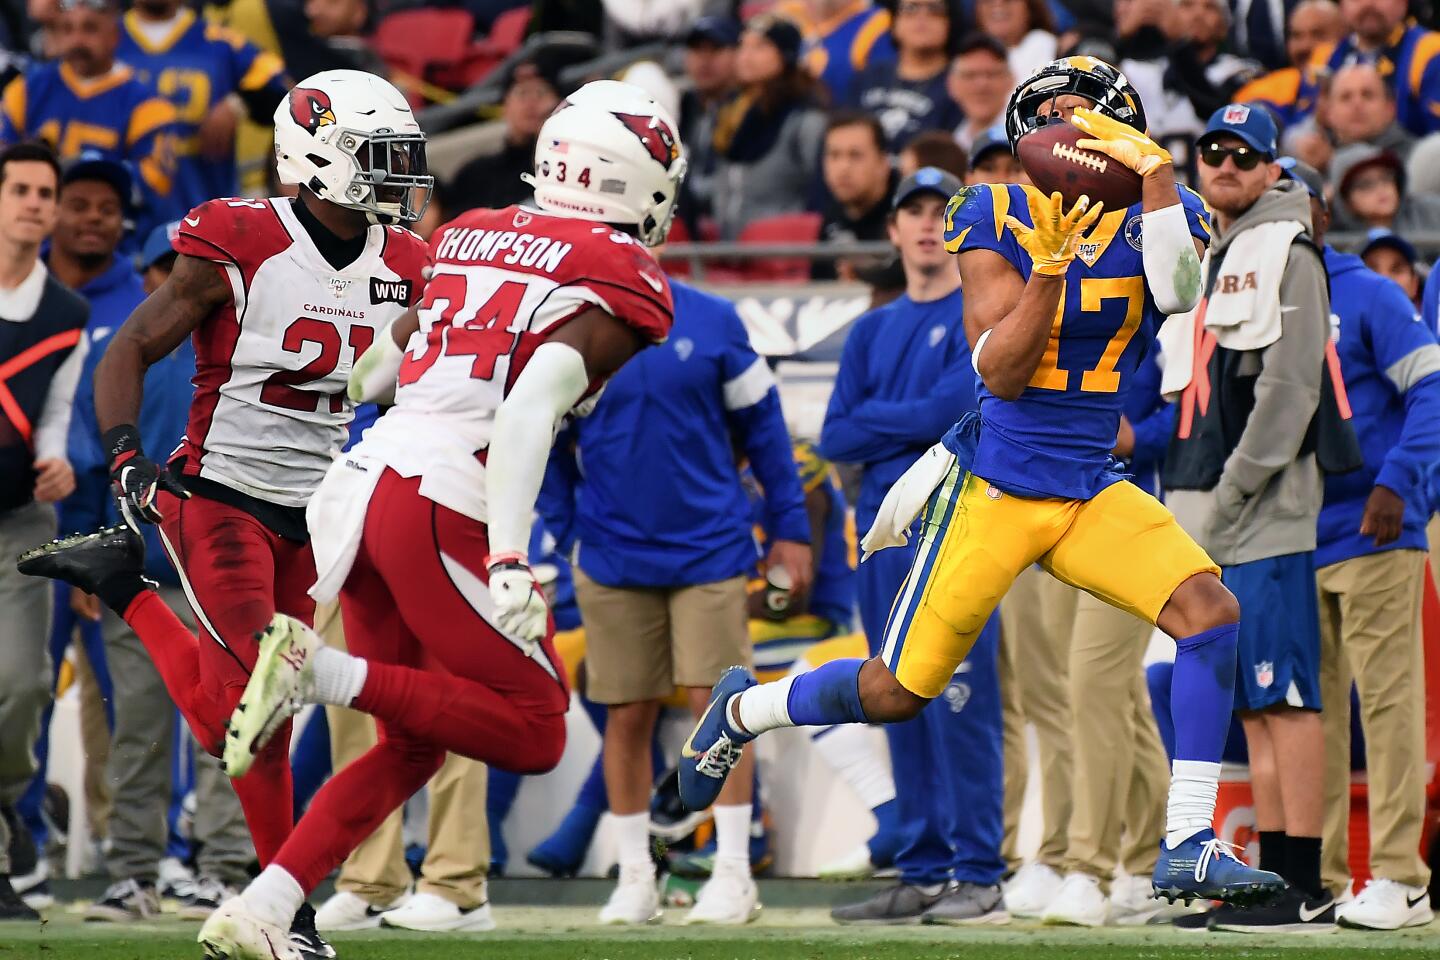 Rams wide receiver Robert Woods hauls in a long pass in front of Arizona Cardinals cornerback Patrick Peterson and safety Jalen Thompson.